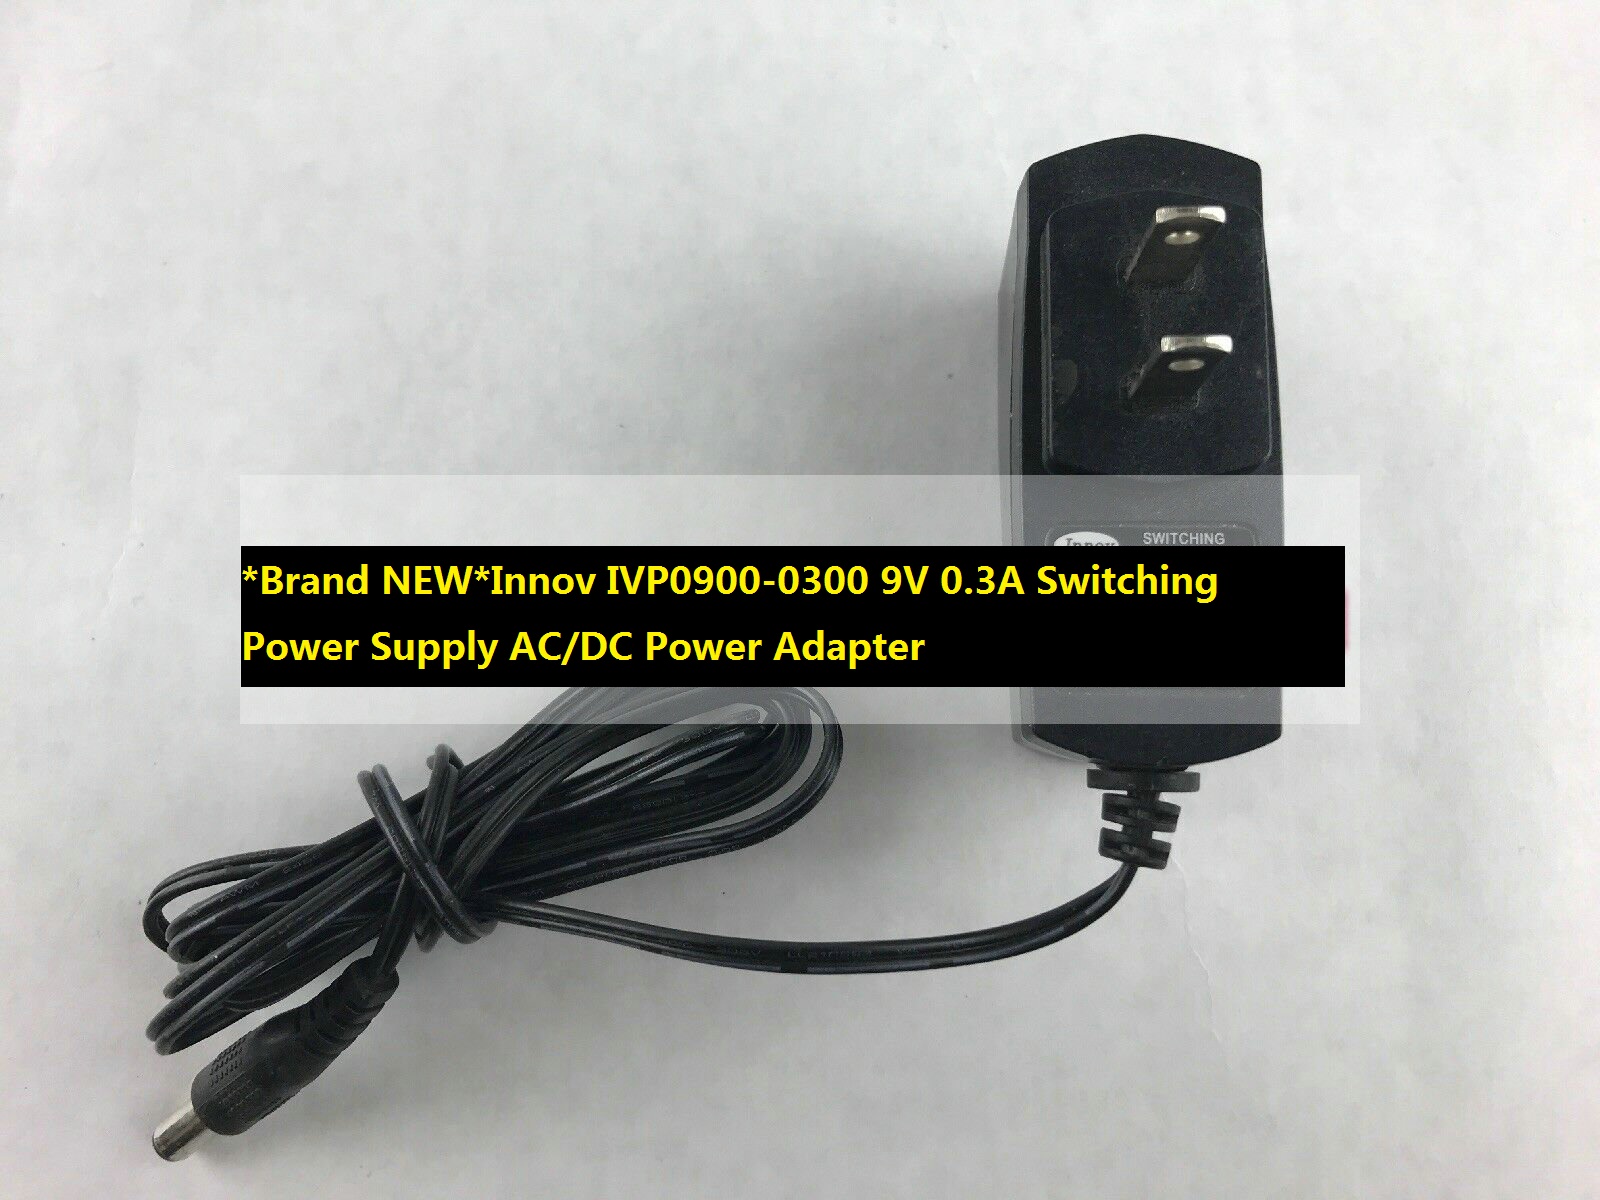 *Brand NEW*Innov IVP0900-0300 9V 0.3A Switching Power Supply AC/DC Power Adapter